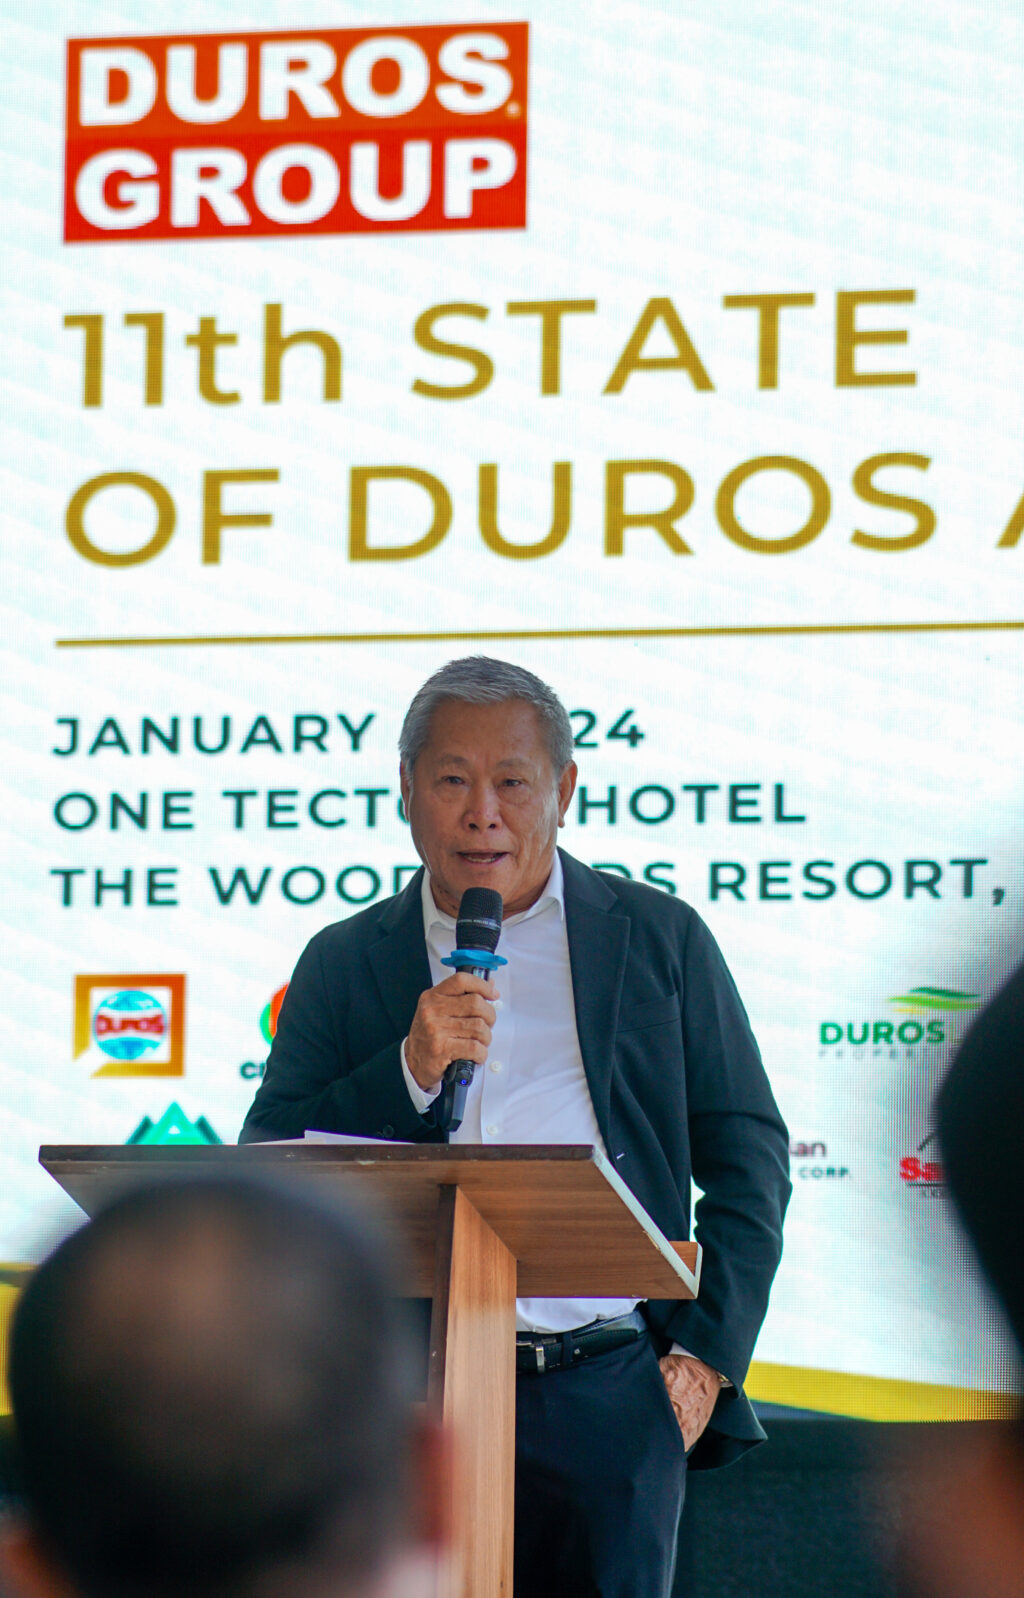 Duros Chaiman of the Board Addresses the employees